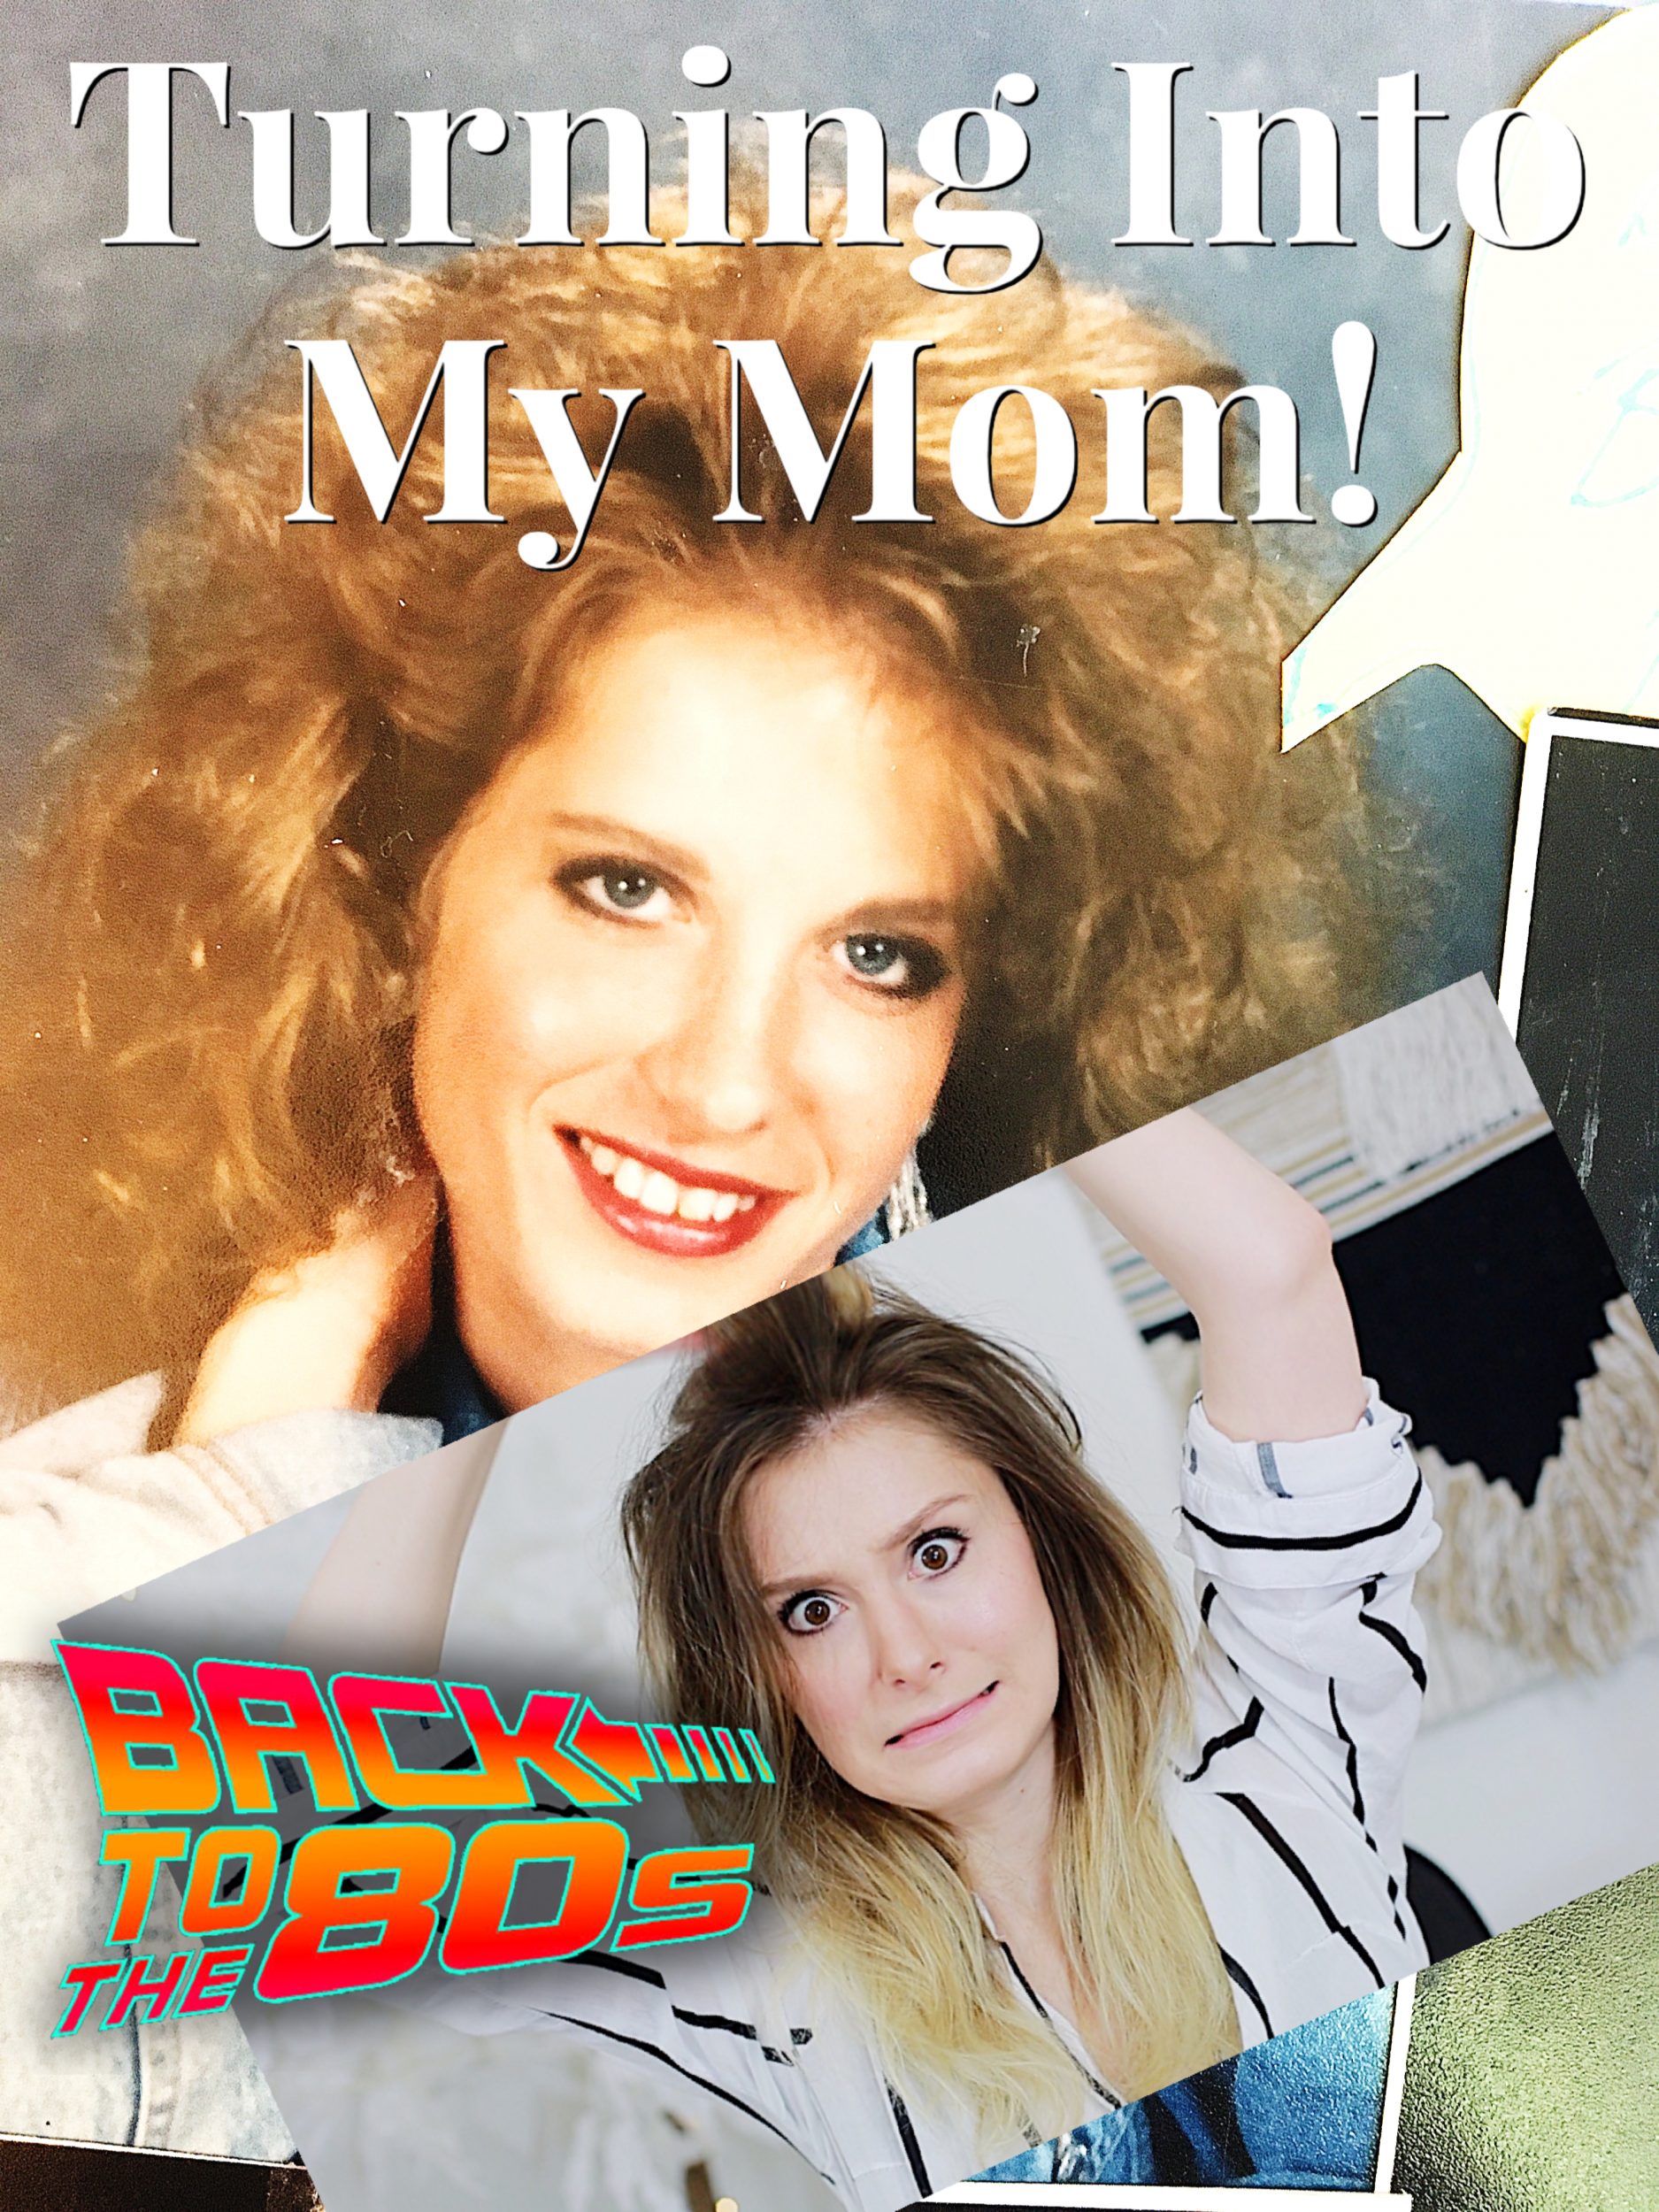 North Carolina beauty, fashion, and lifestyle blogger and Youtuber Jessica Linn recreating a 1980's hair and makeup look form her mom's glamor shots.